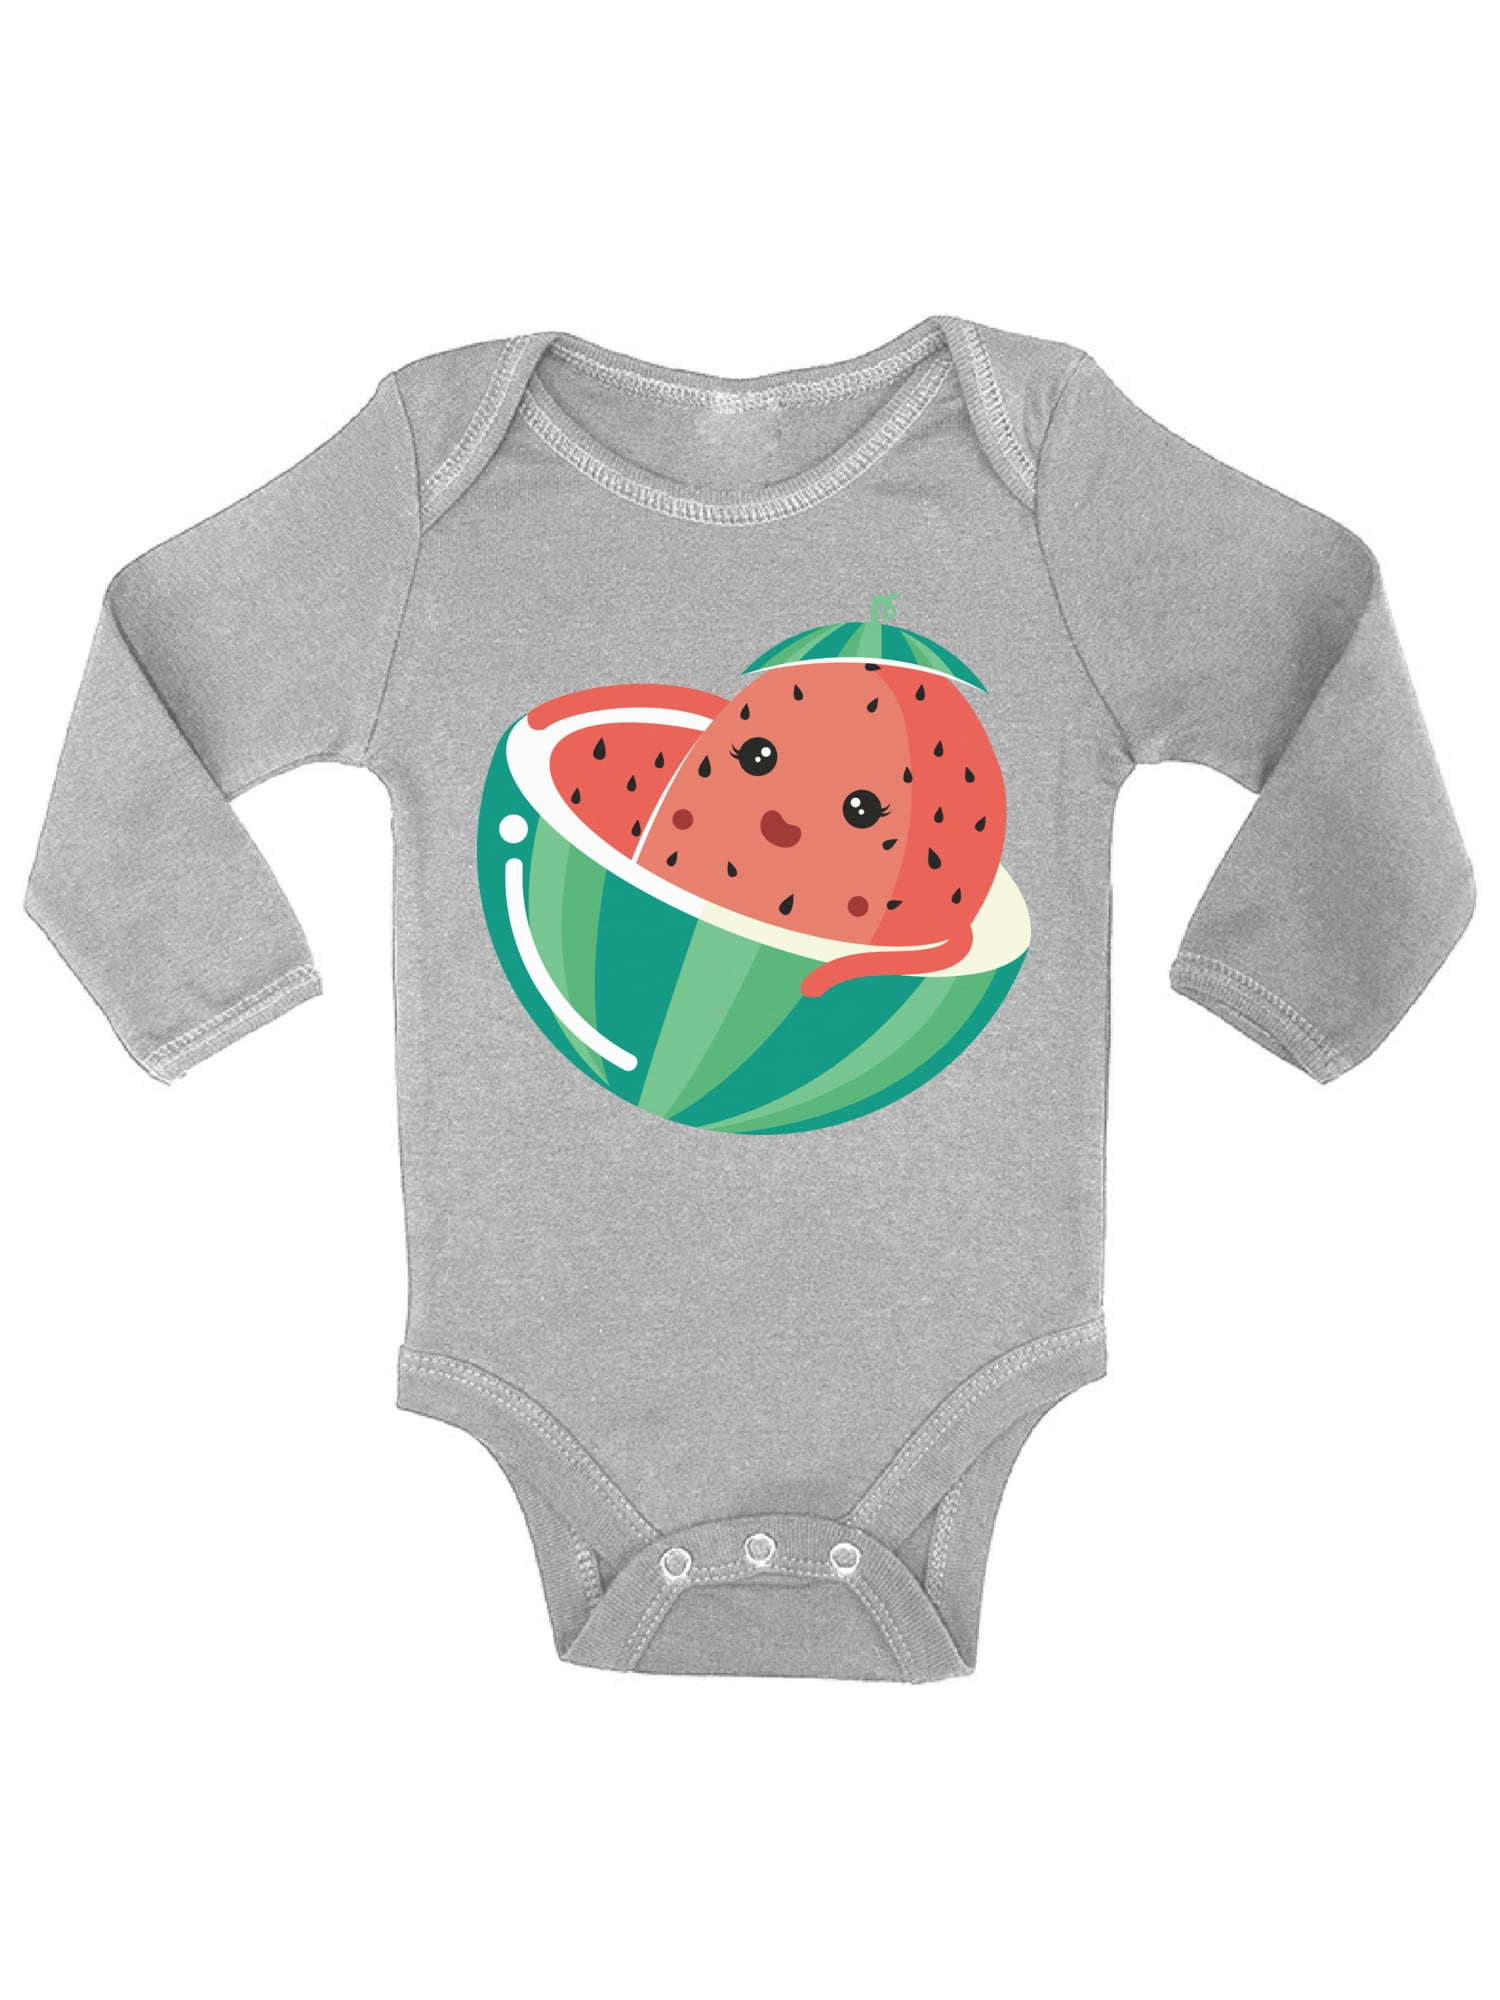 watermelon outfit 12 months